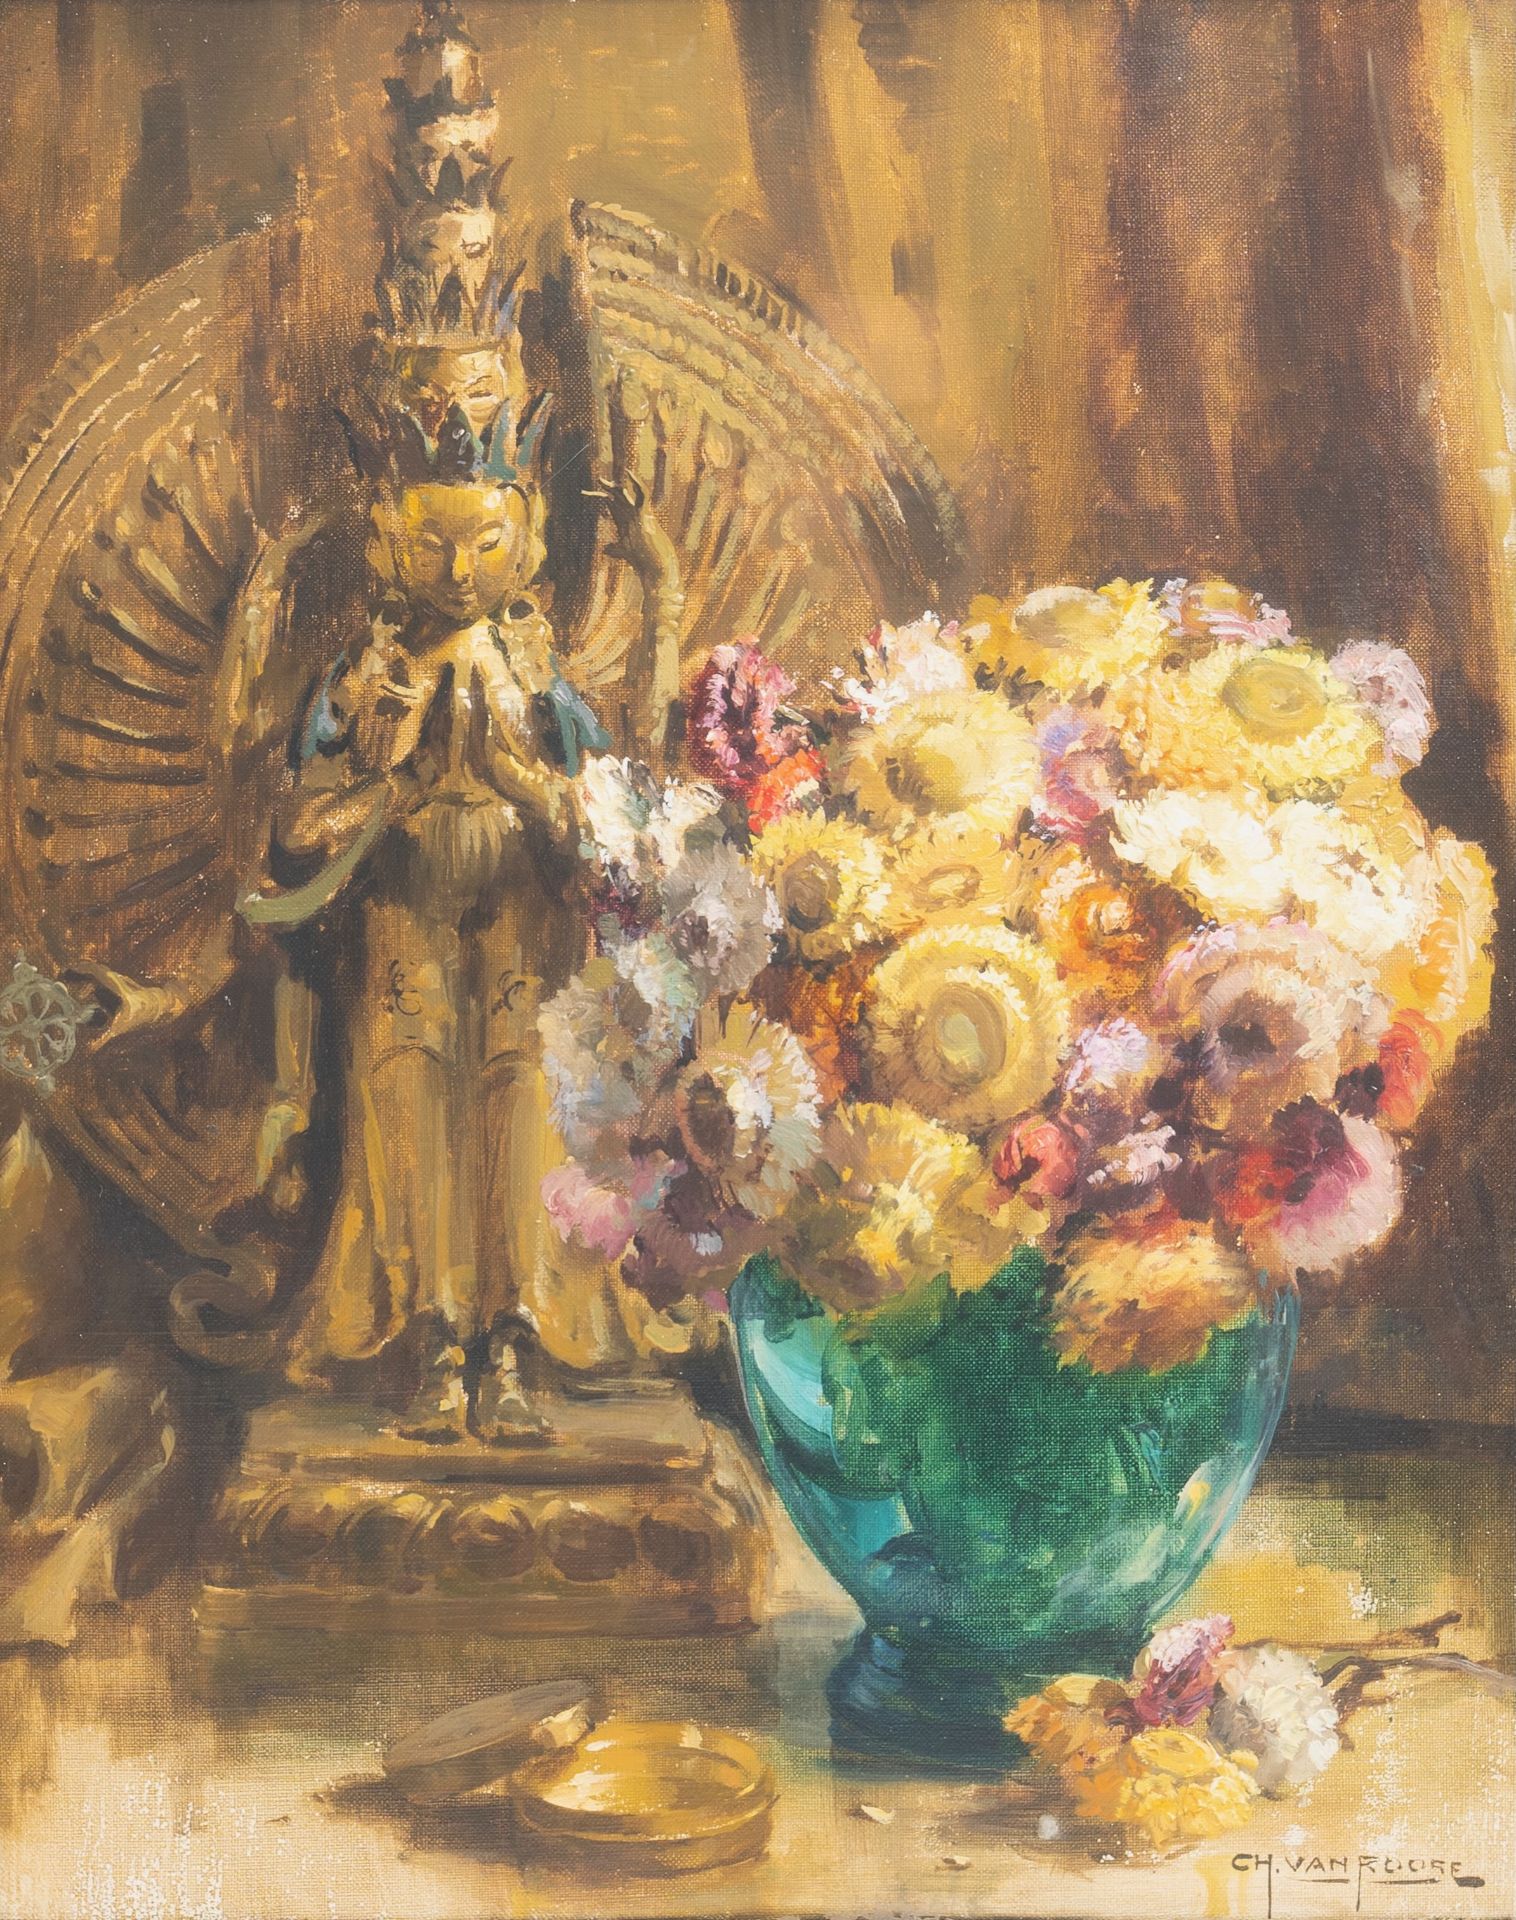 Charles Van Roose (1883-1960): Still life with flowers and a Buddha, oil on canvas